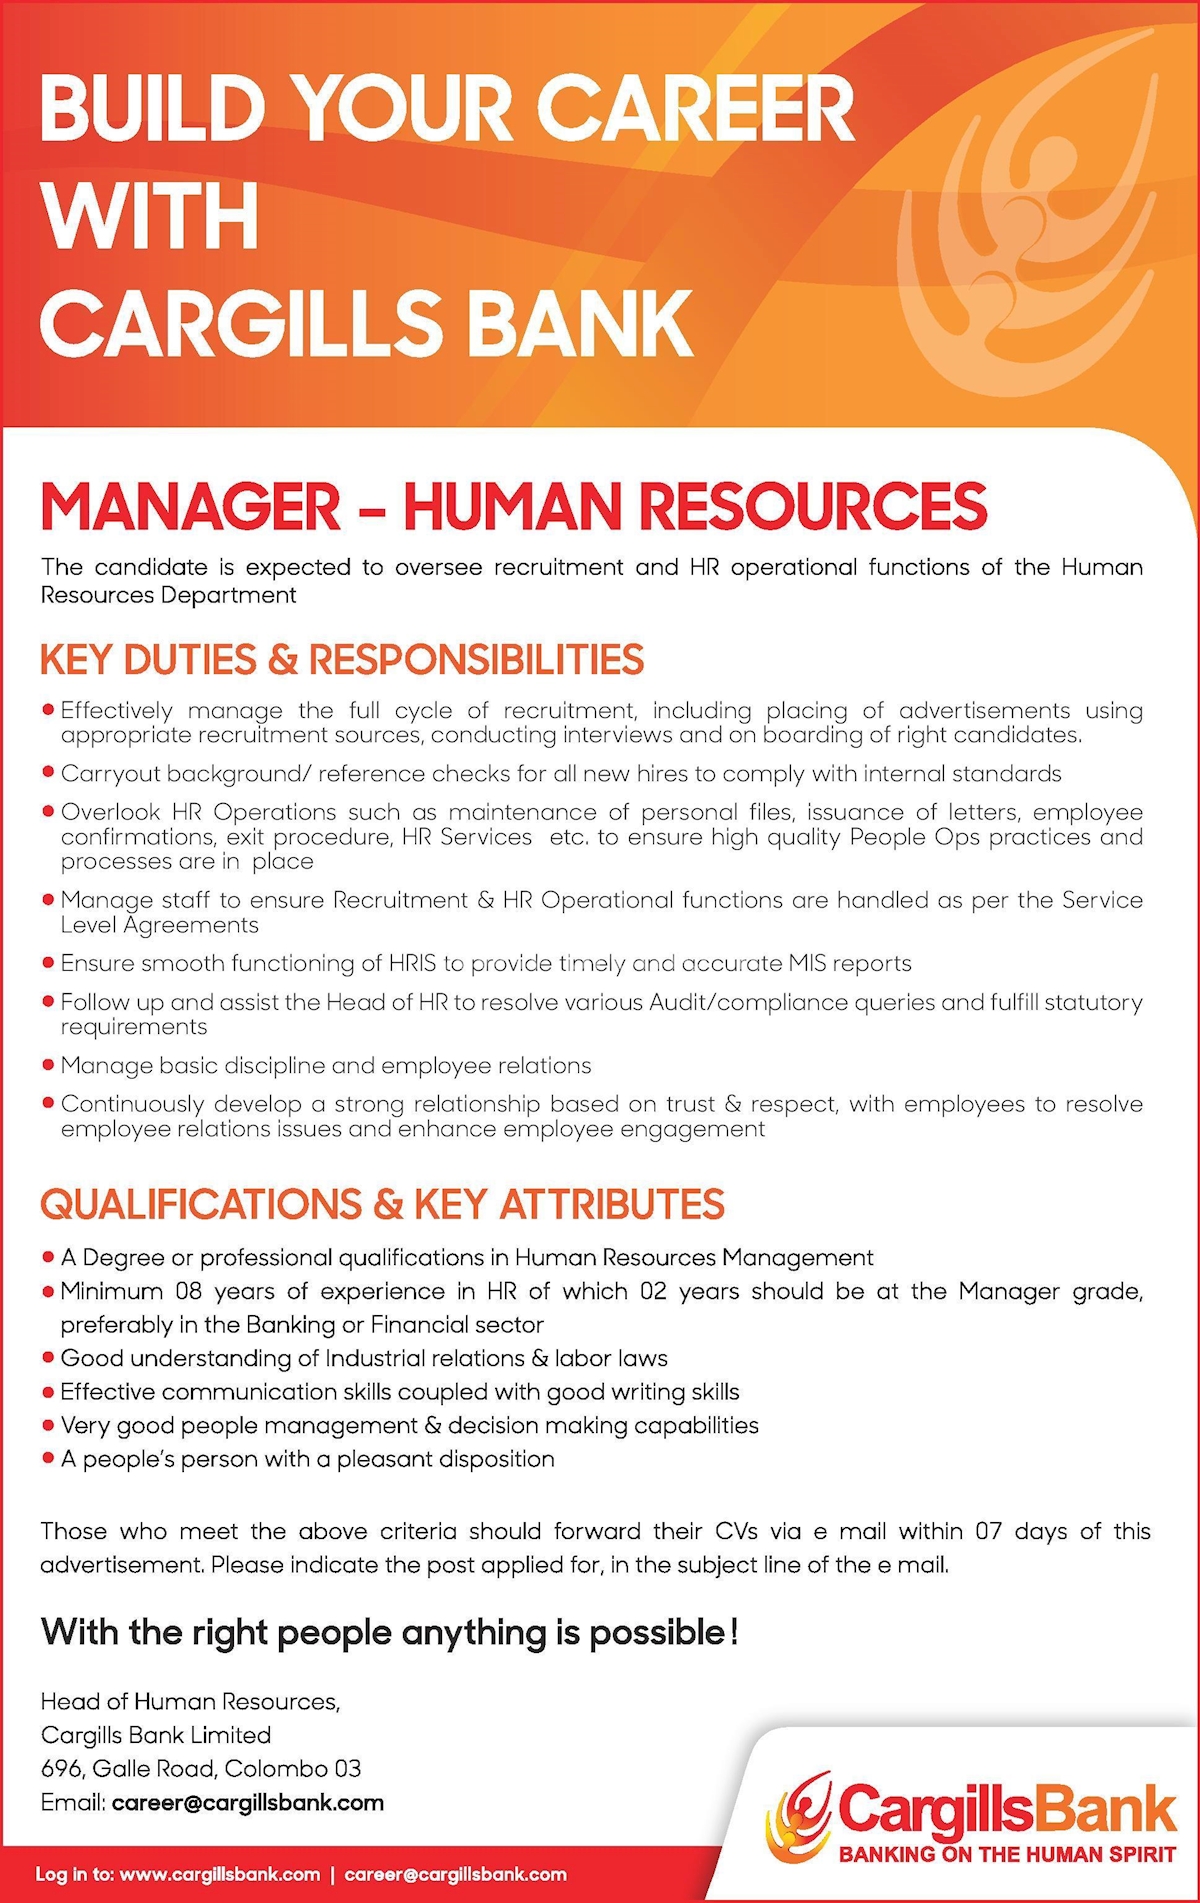 Manager - Human Resources